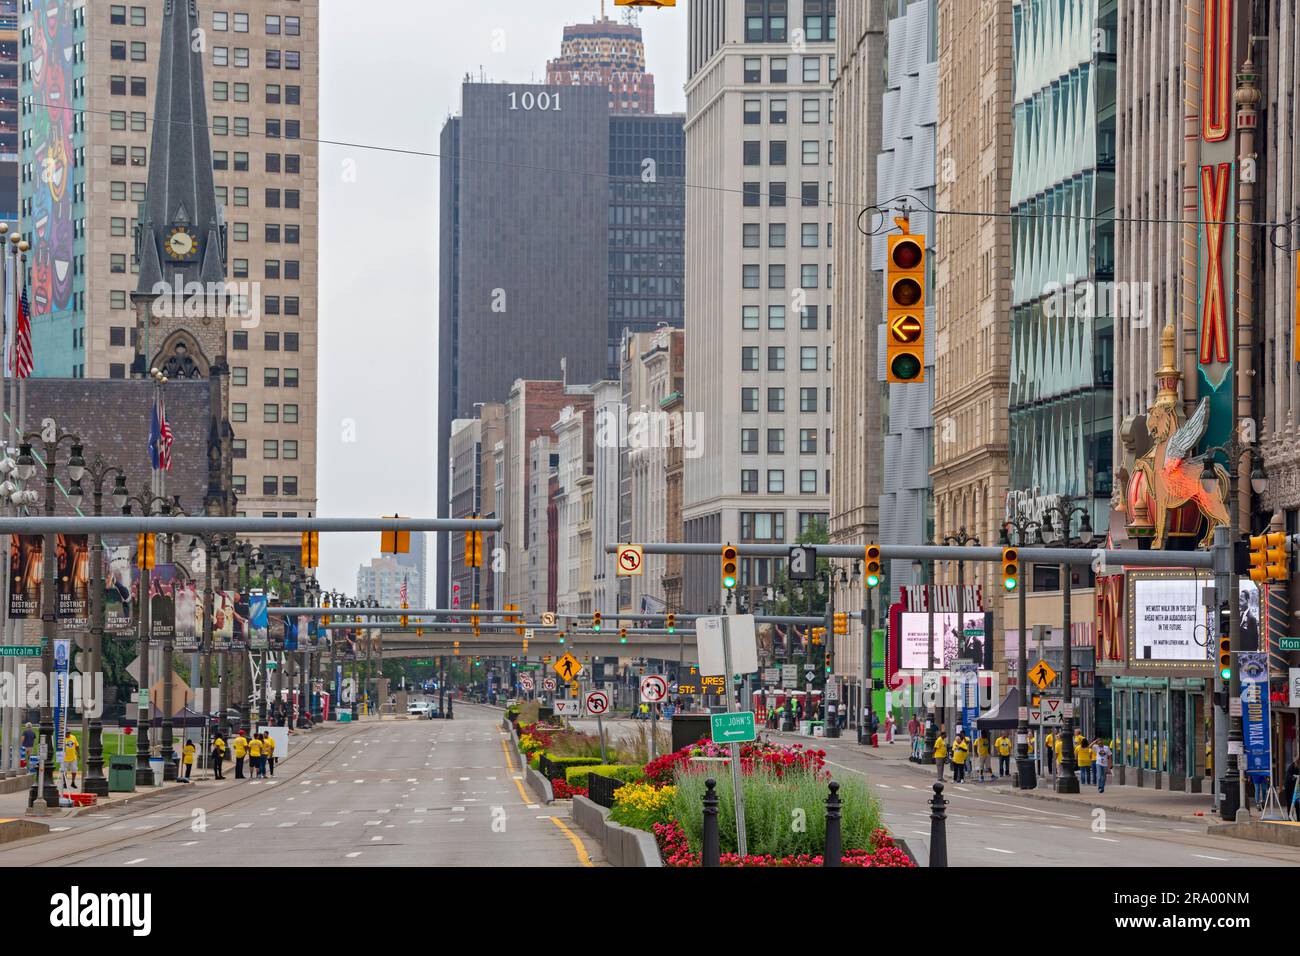 Detroit, Michigan - Woodward Avenue in downtown Detroit. The street was closed to traffic due to a parade. Stock Photo